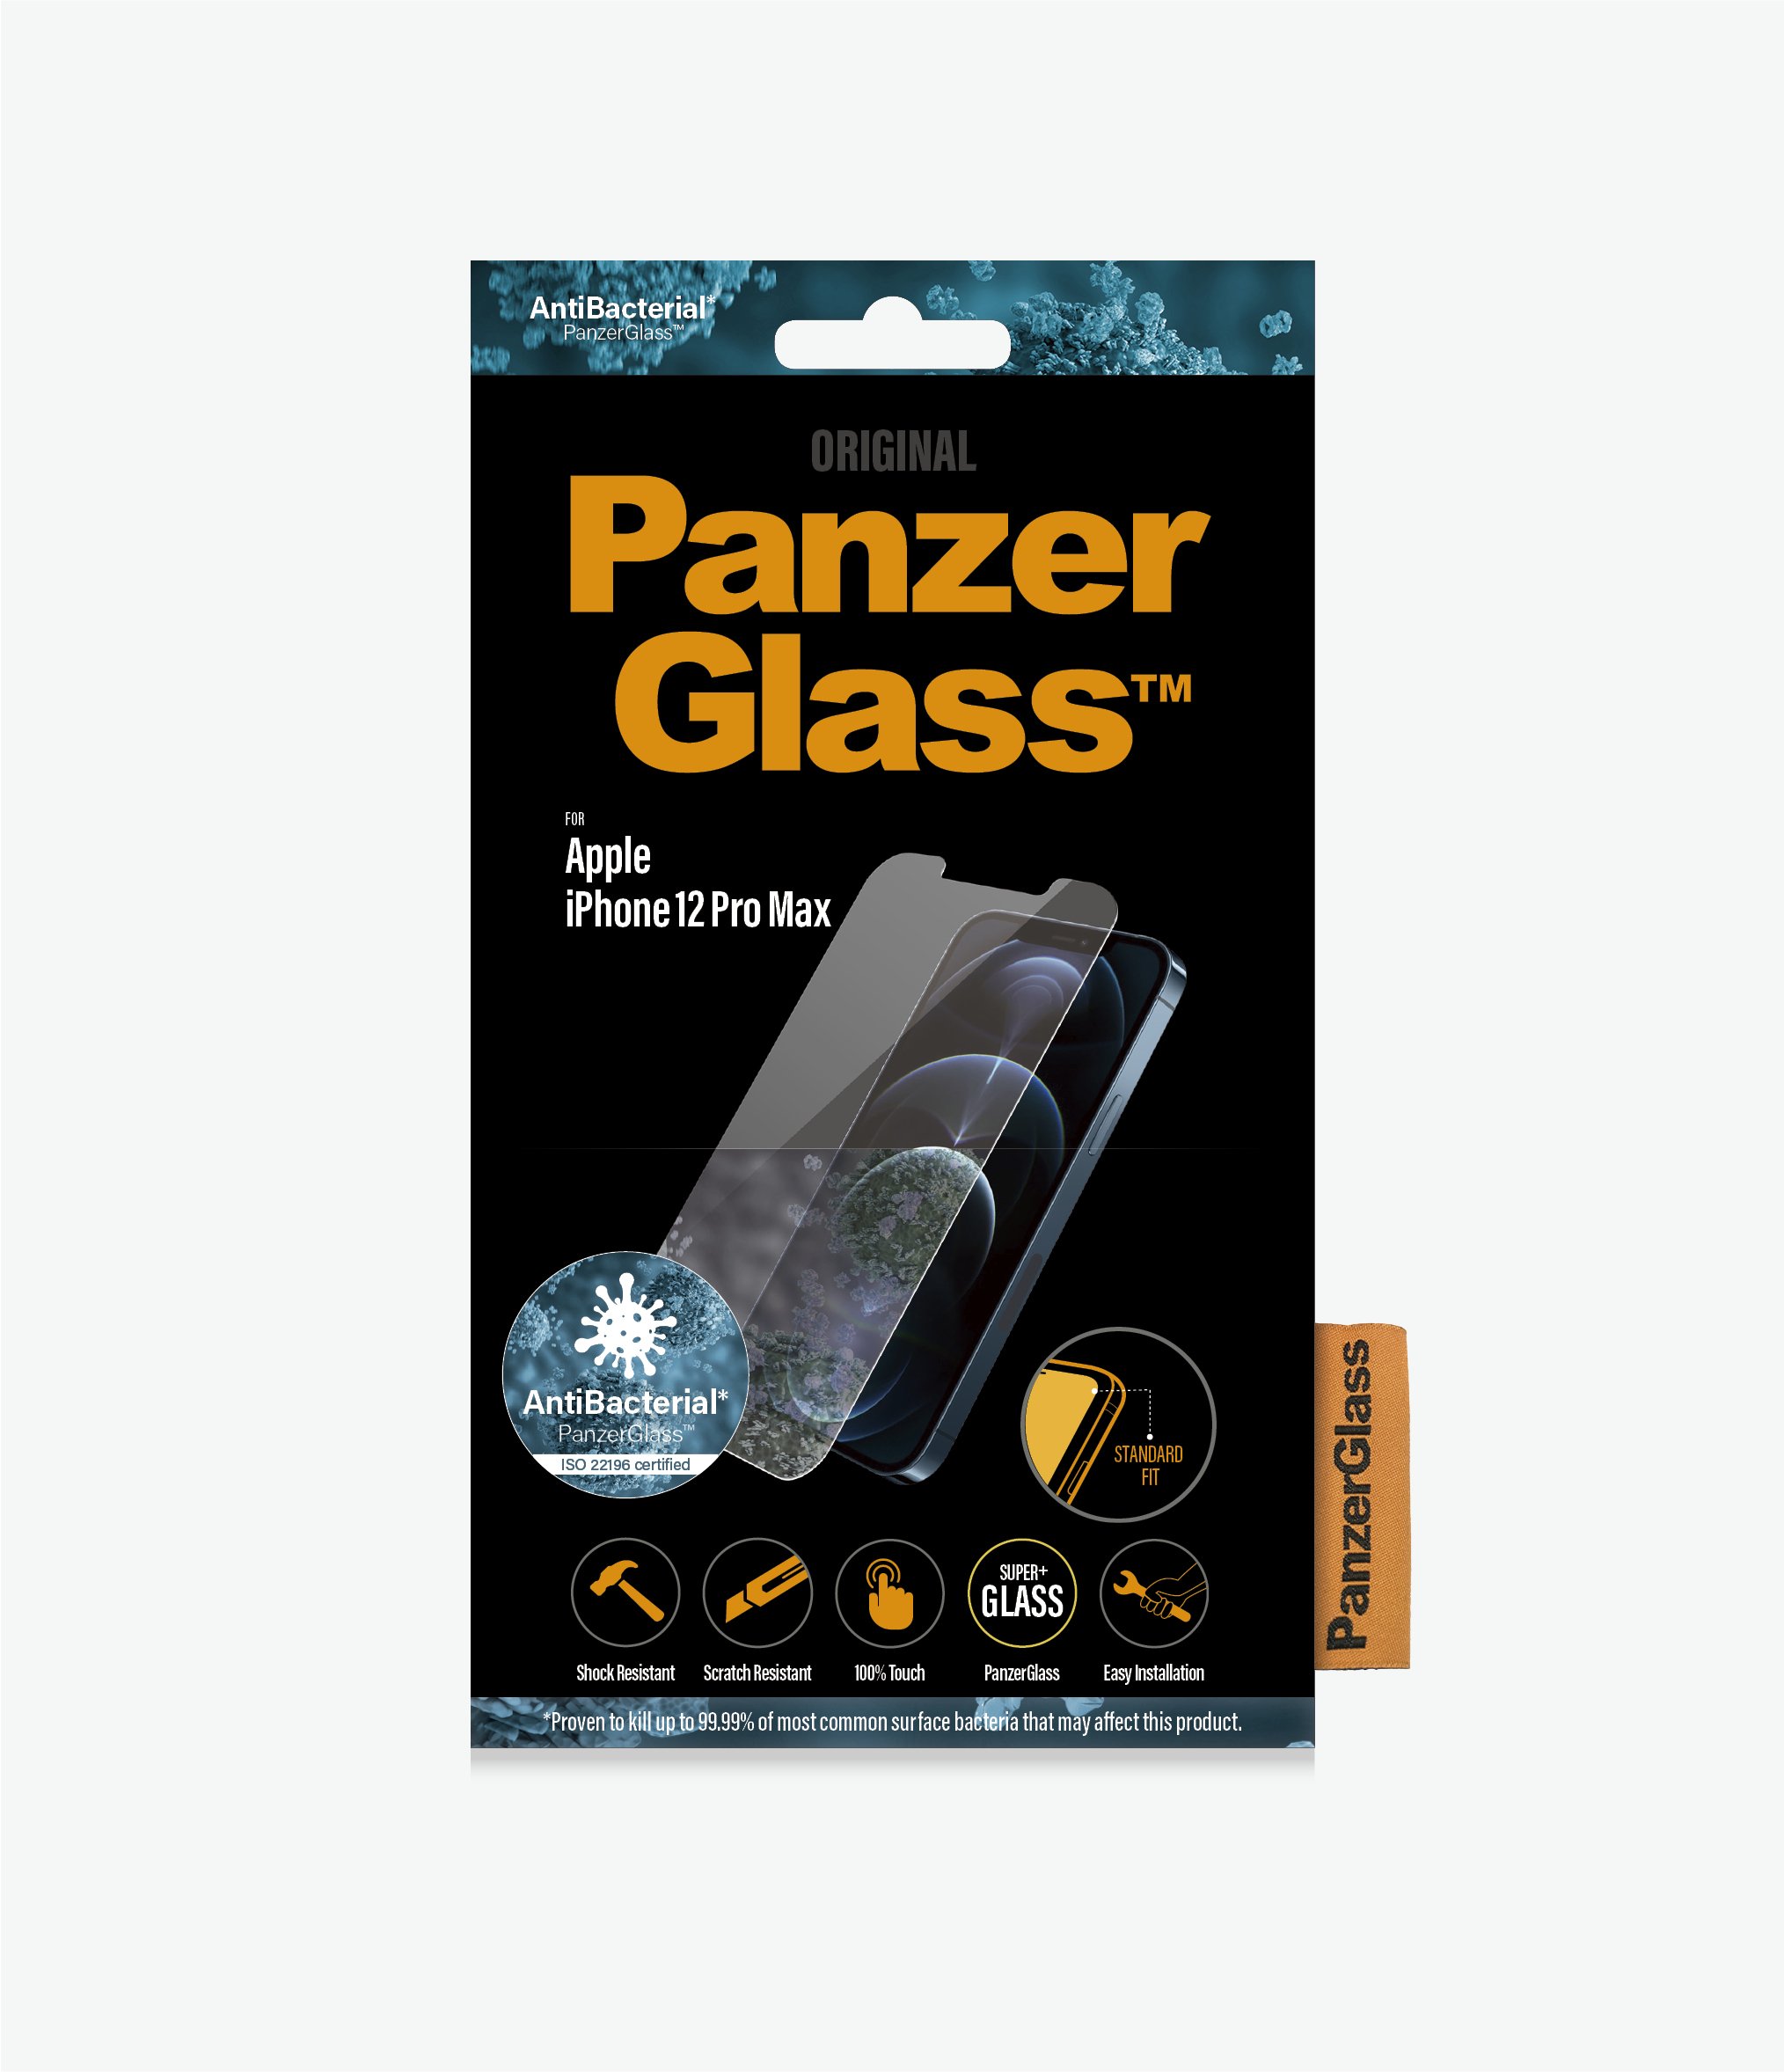 PanzerGlass™ Apple iPhone 12 Pro Max - Clear Glass (2709) - Screen Protector -  Resistant to scratches and bacteria, Shock absorbing, 100% touch